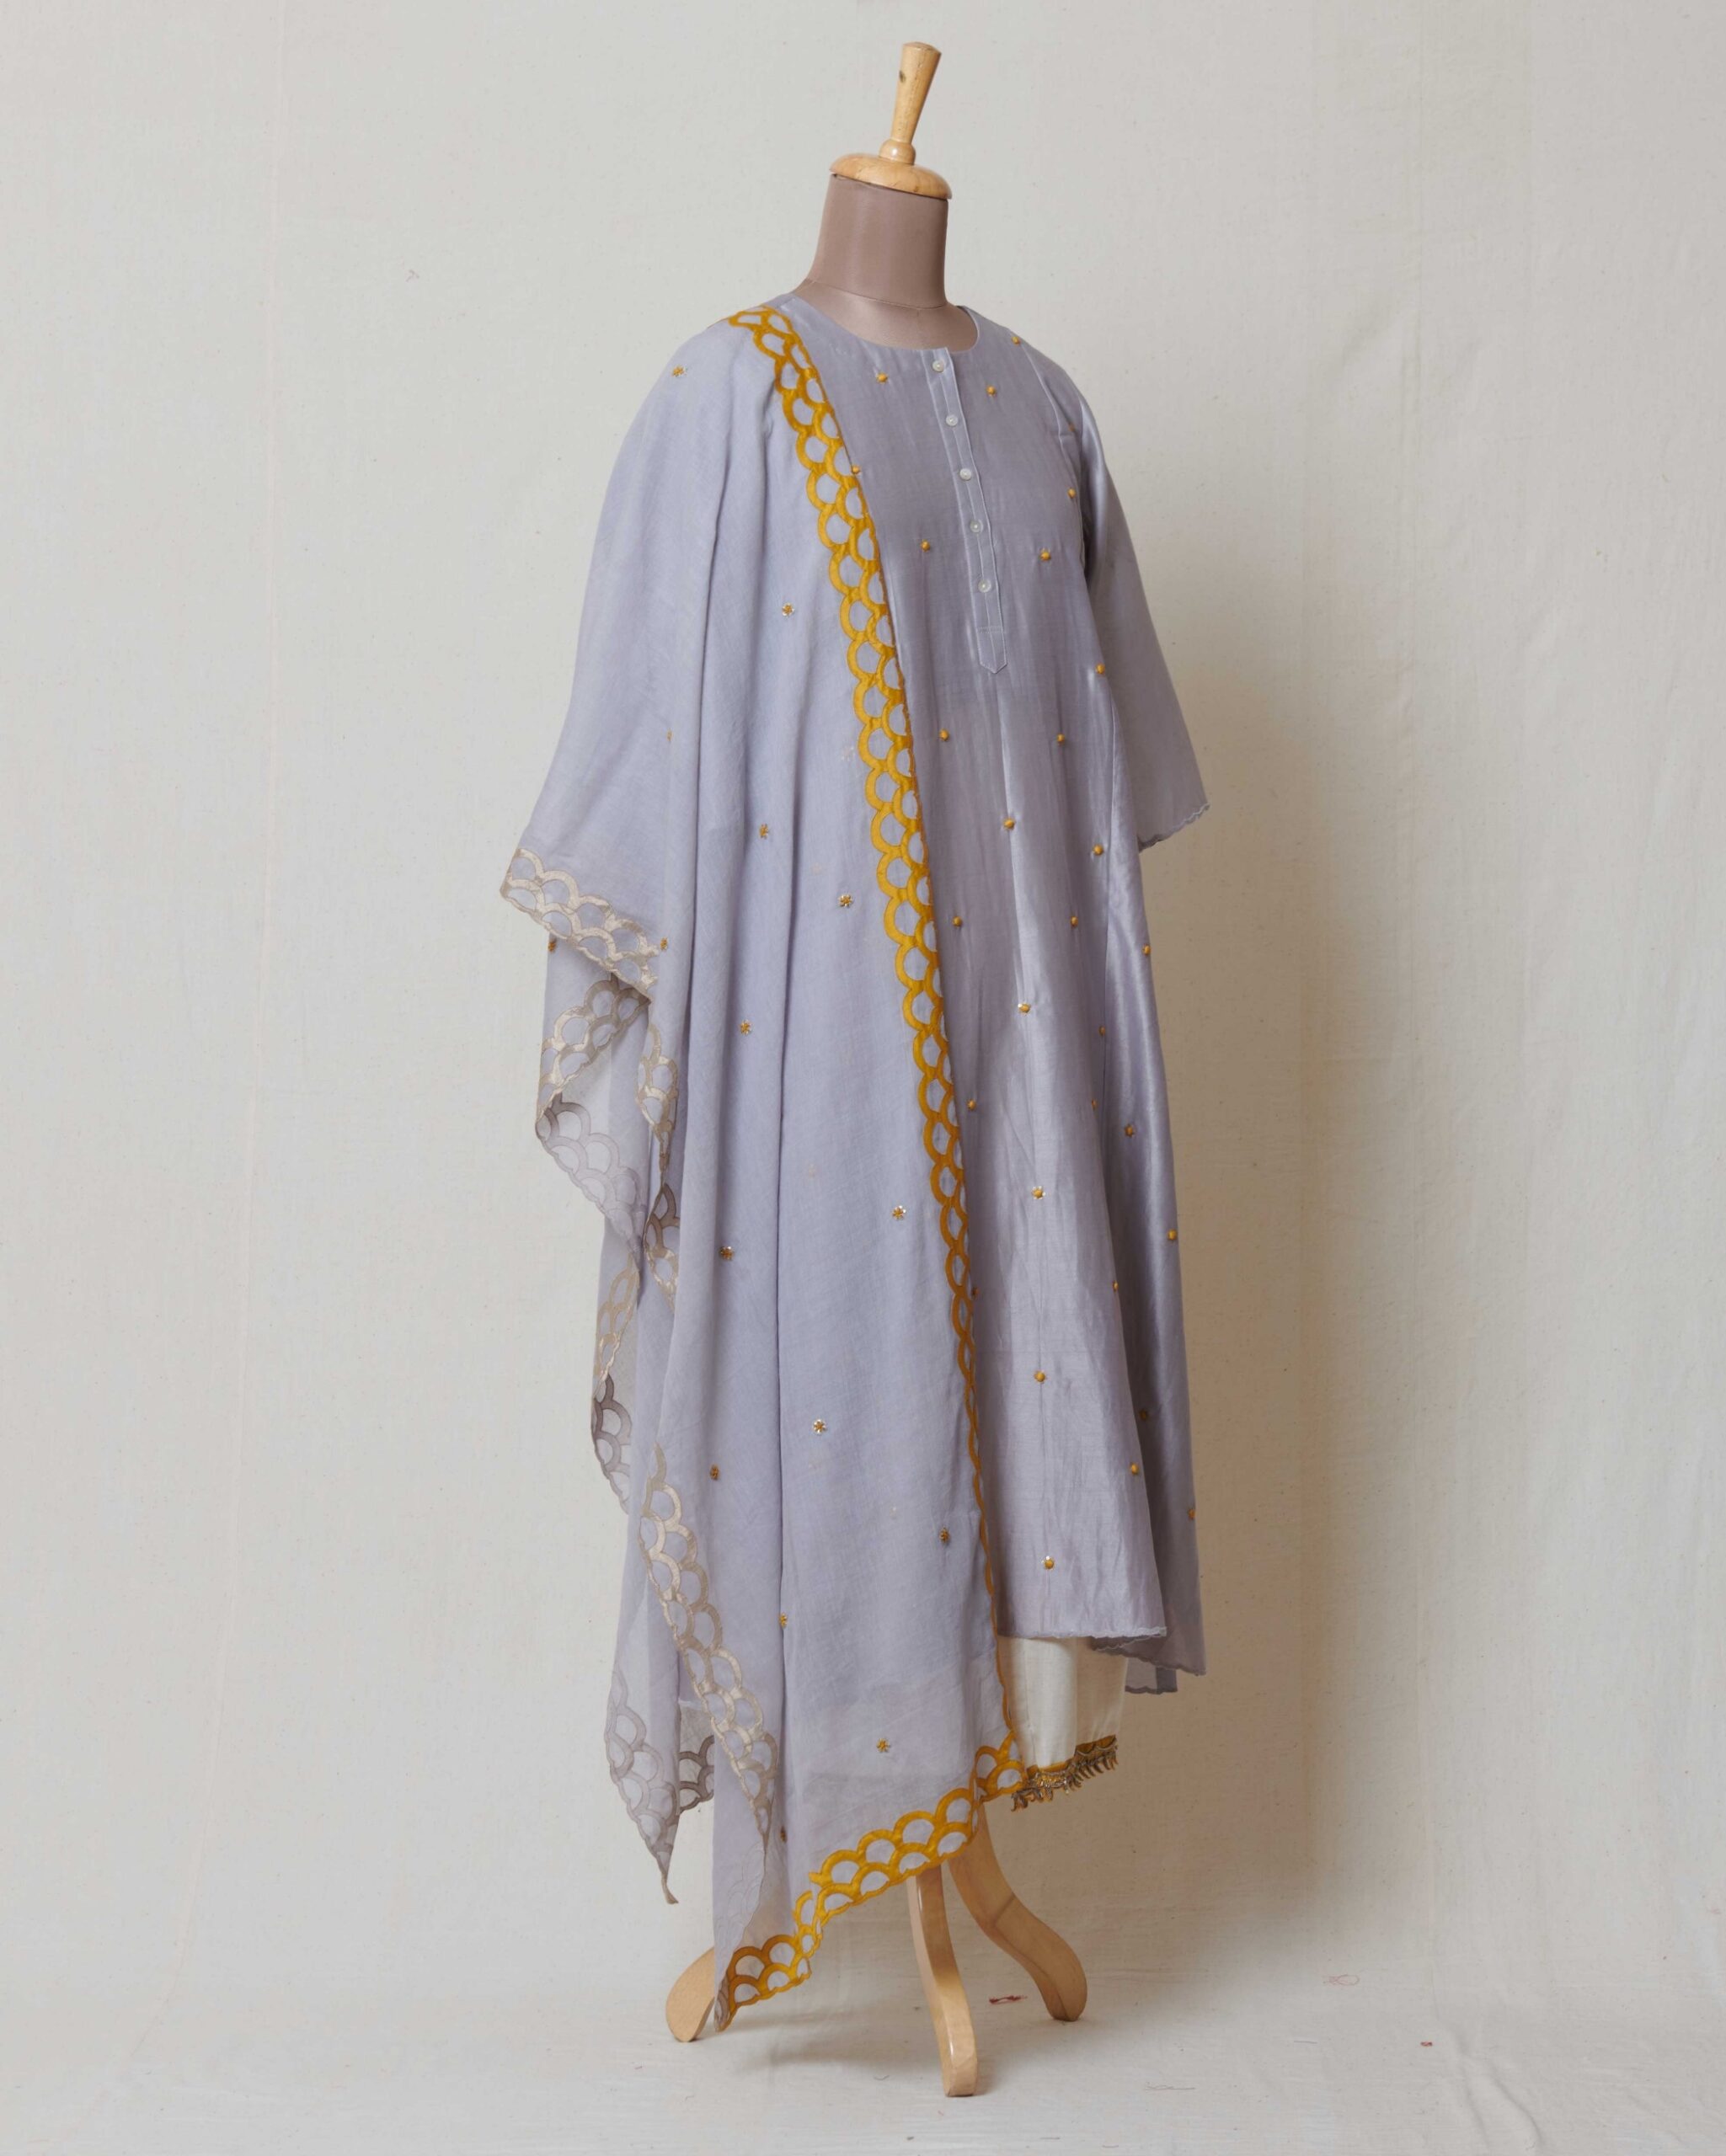 Grey kora chanderi dupatta with yellow and dull gold applique border and highlighted with dull gold and yellow butis